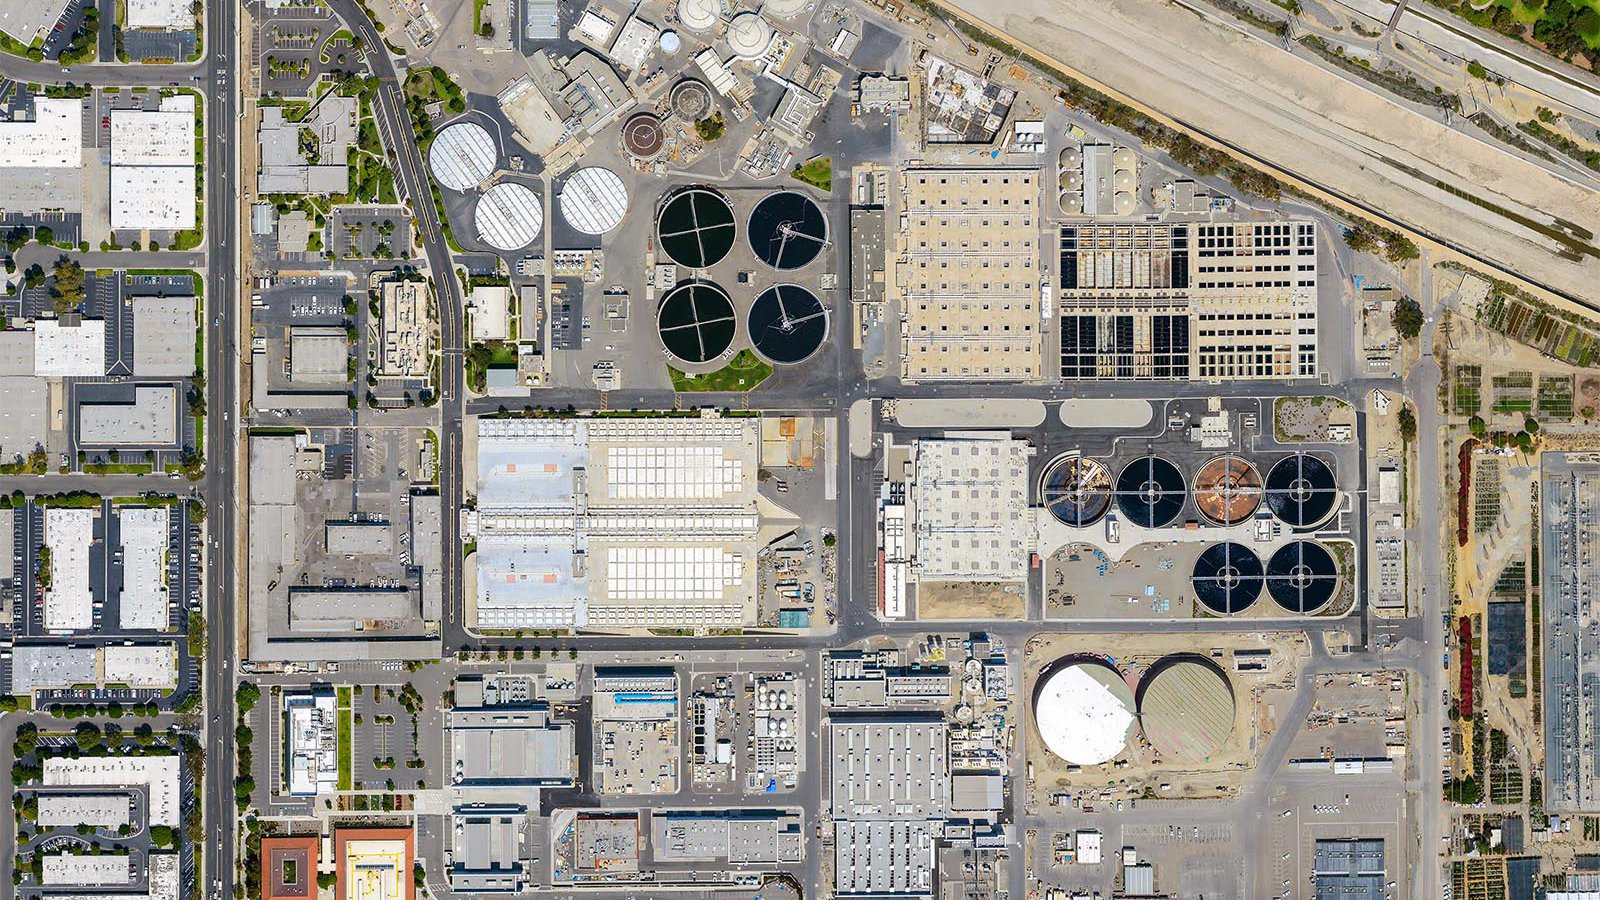 Mapping orthophoto image of a water reclamation plant in Fountain Valley, California